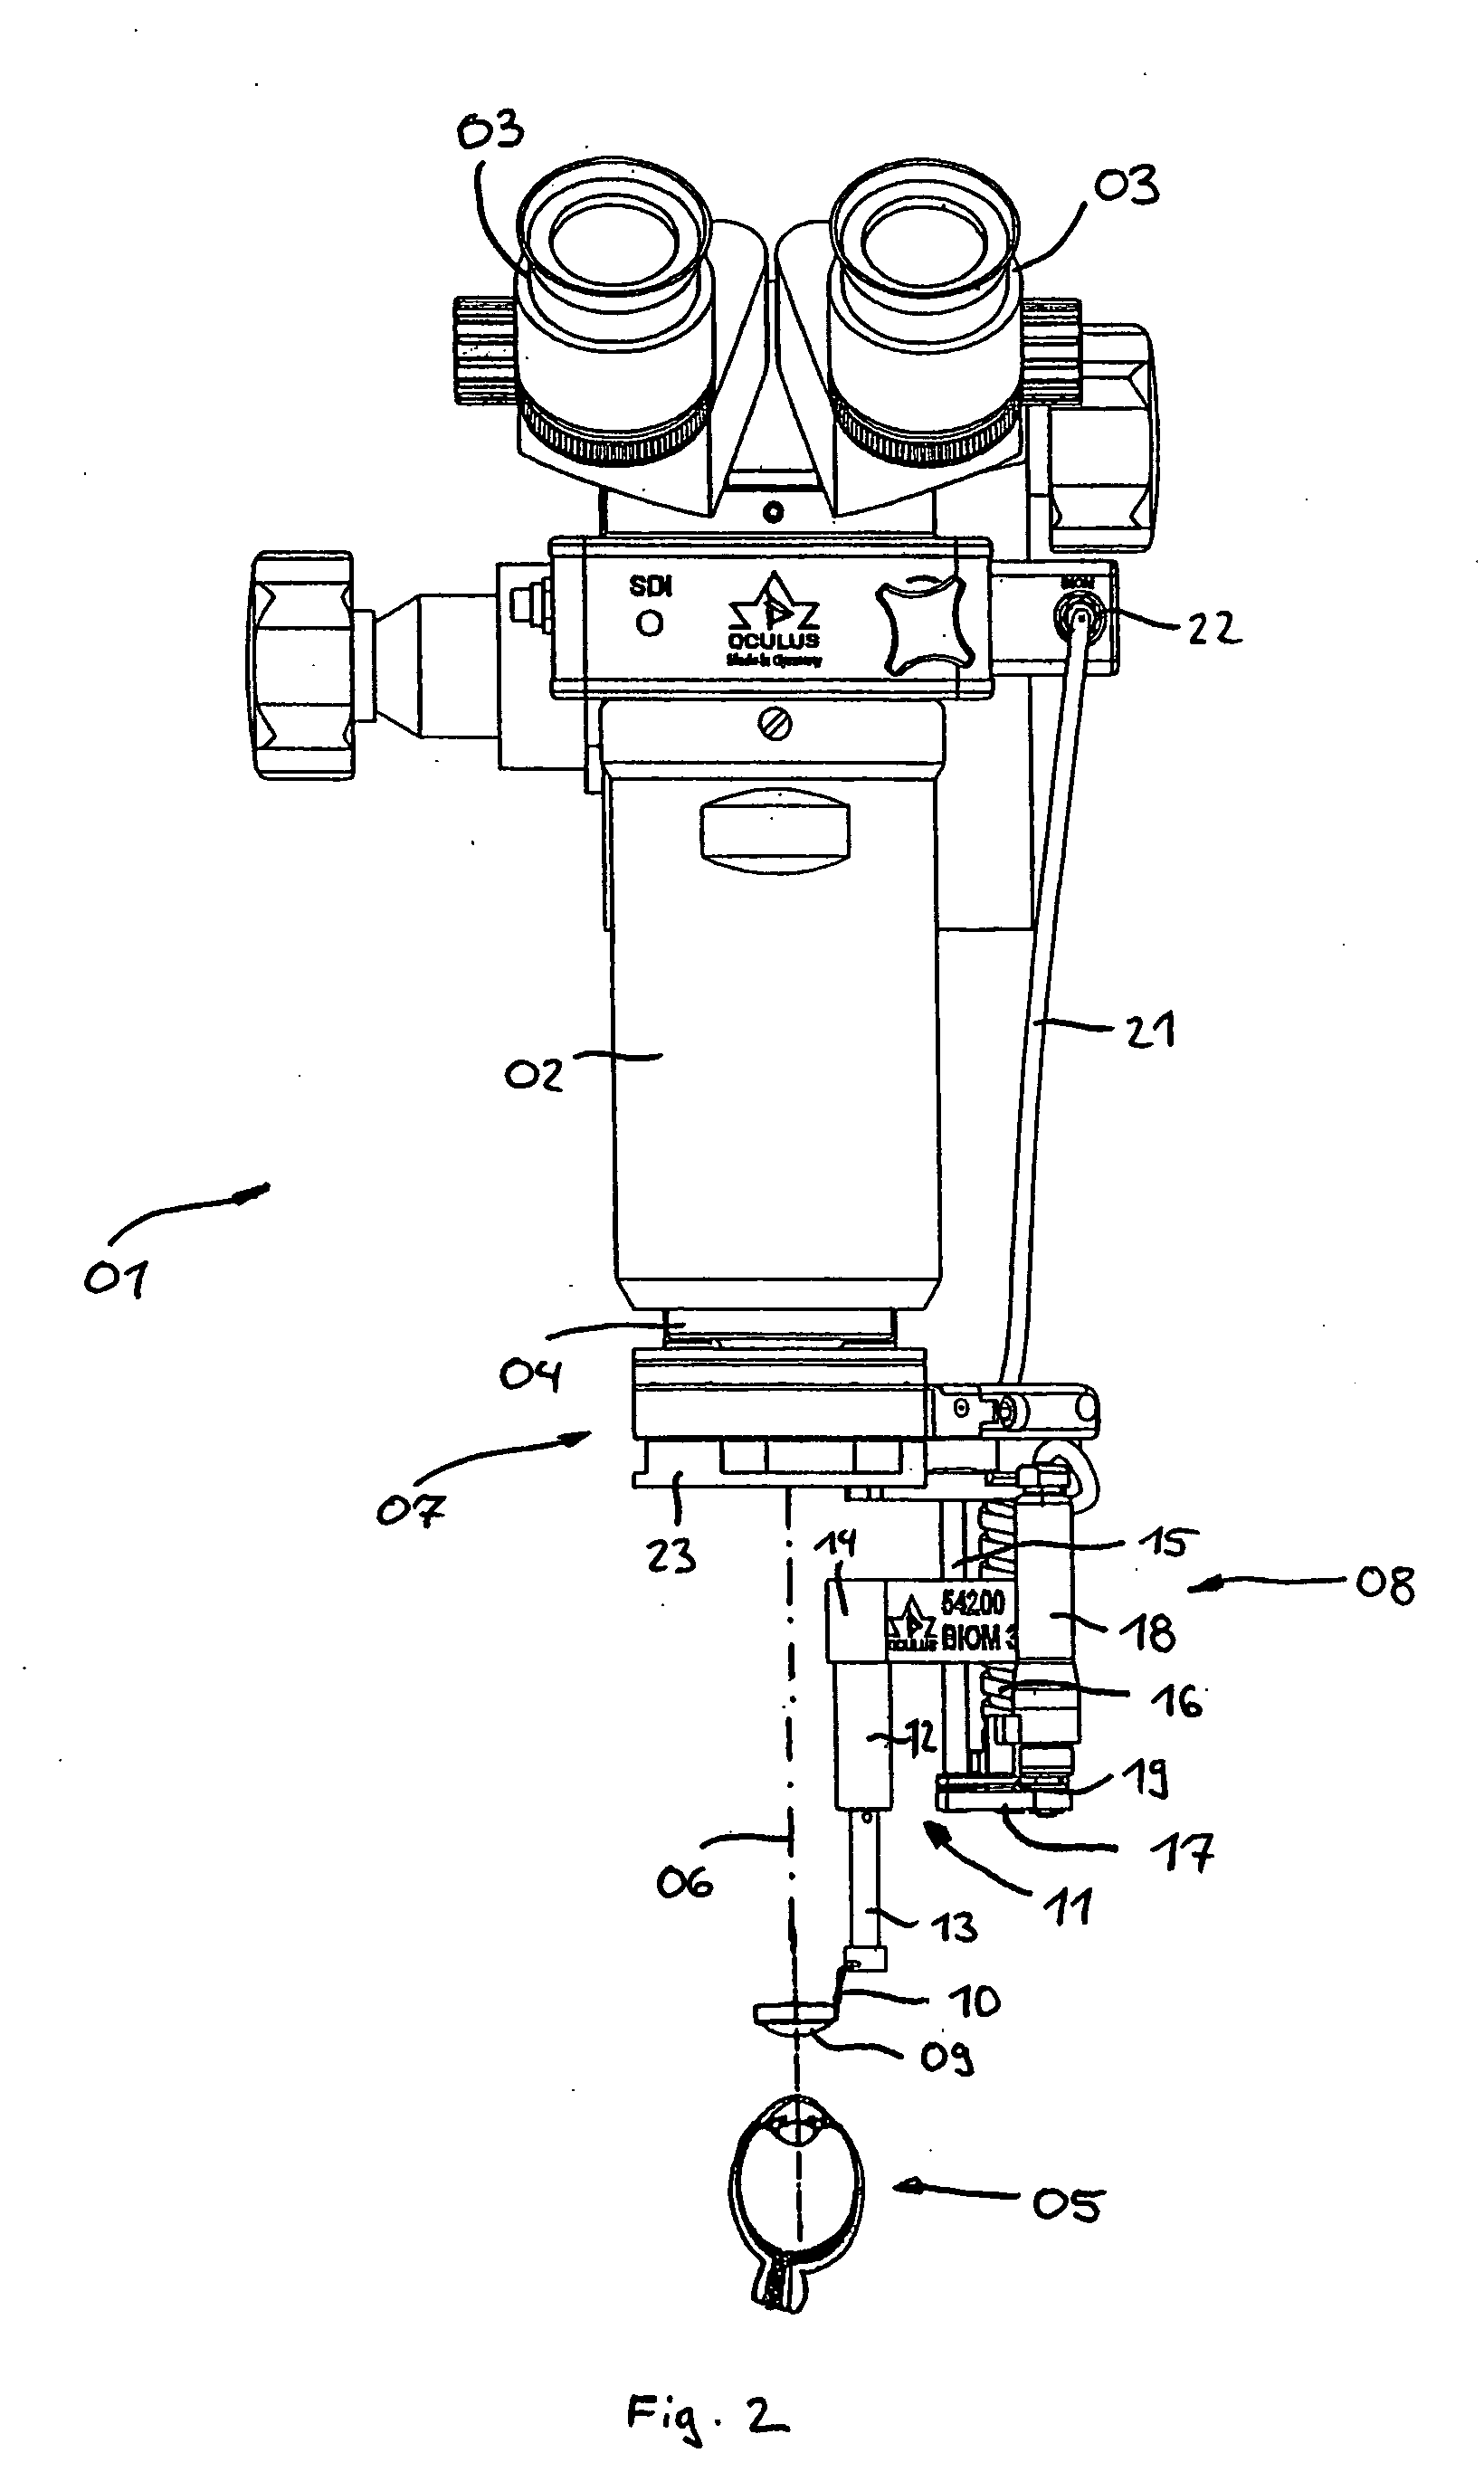 Optical device for releasable attachment to a microscope